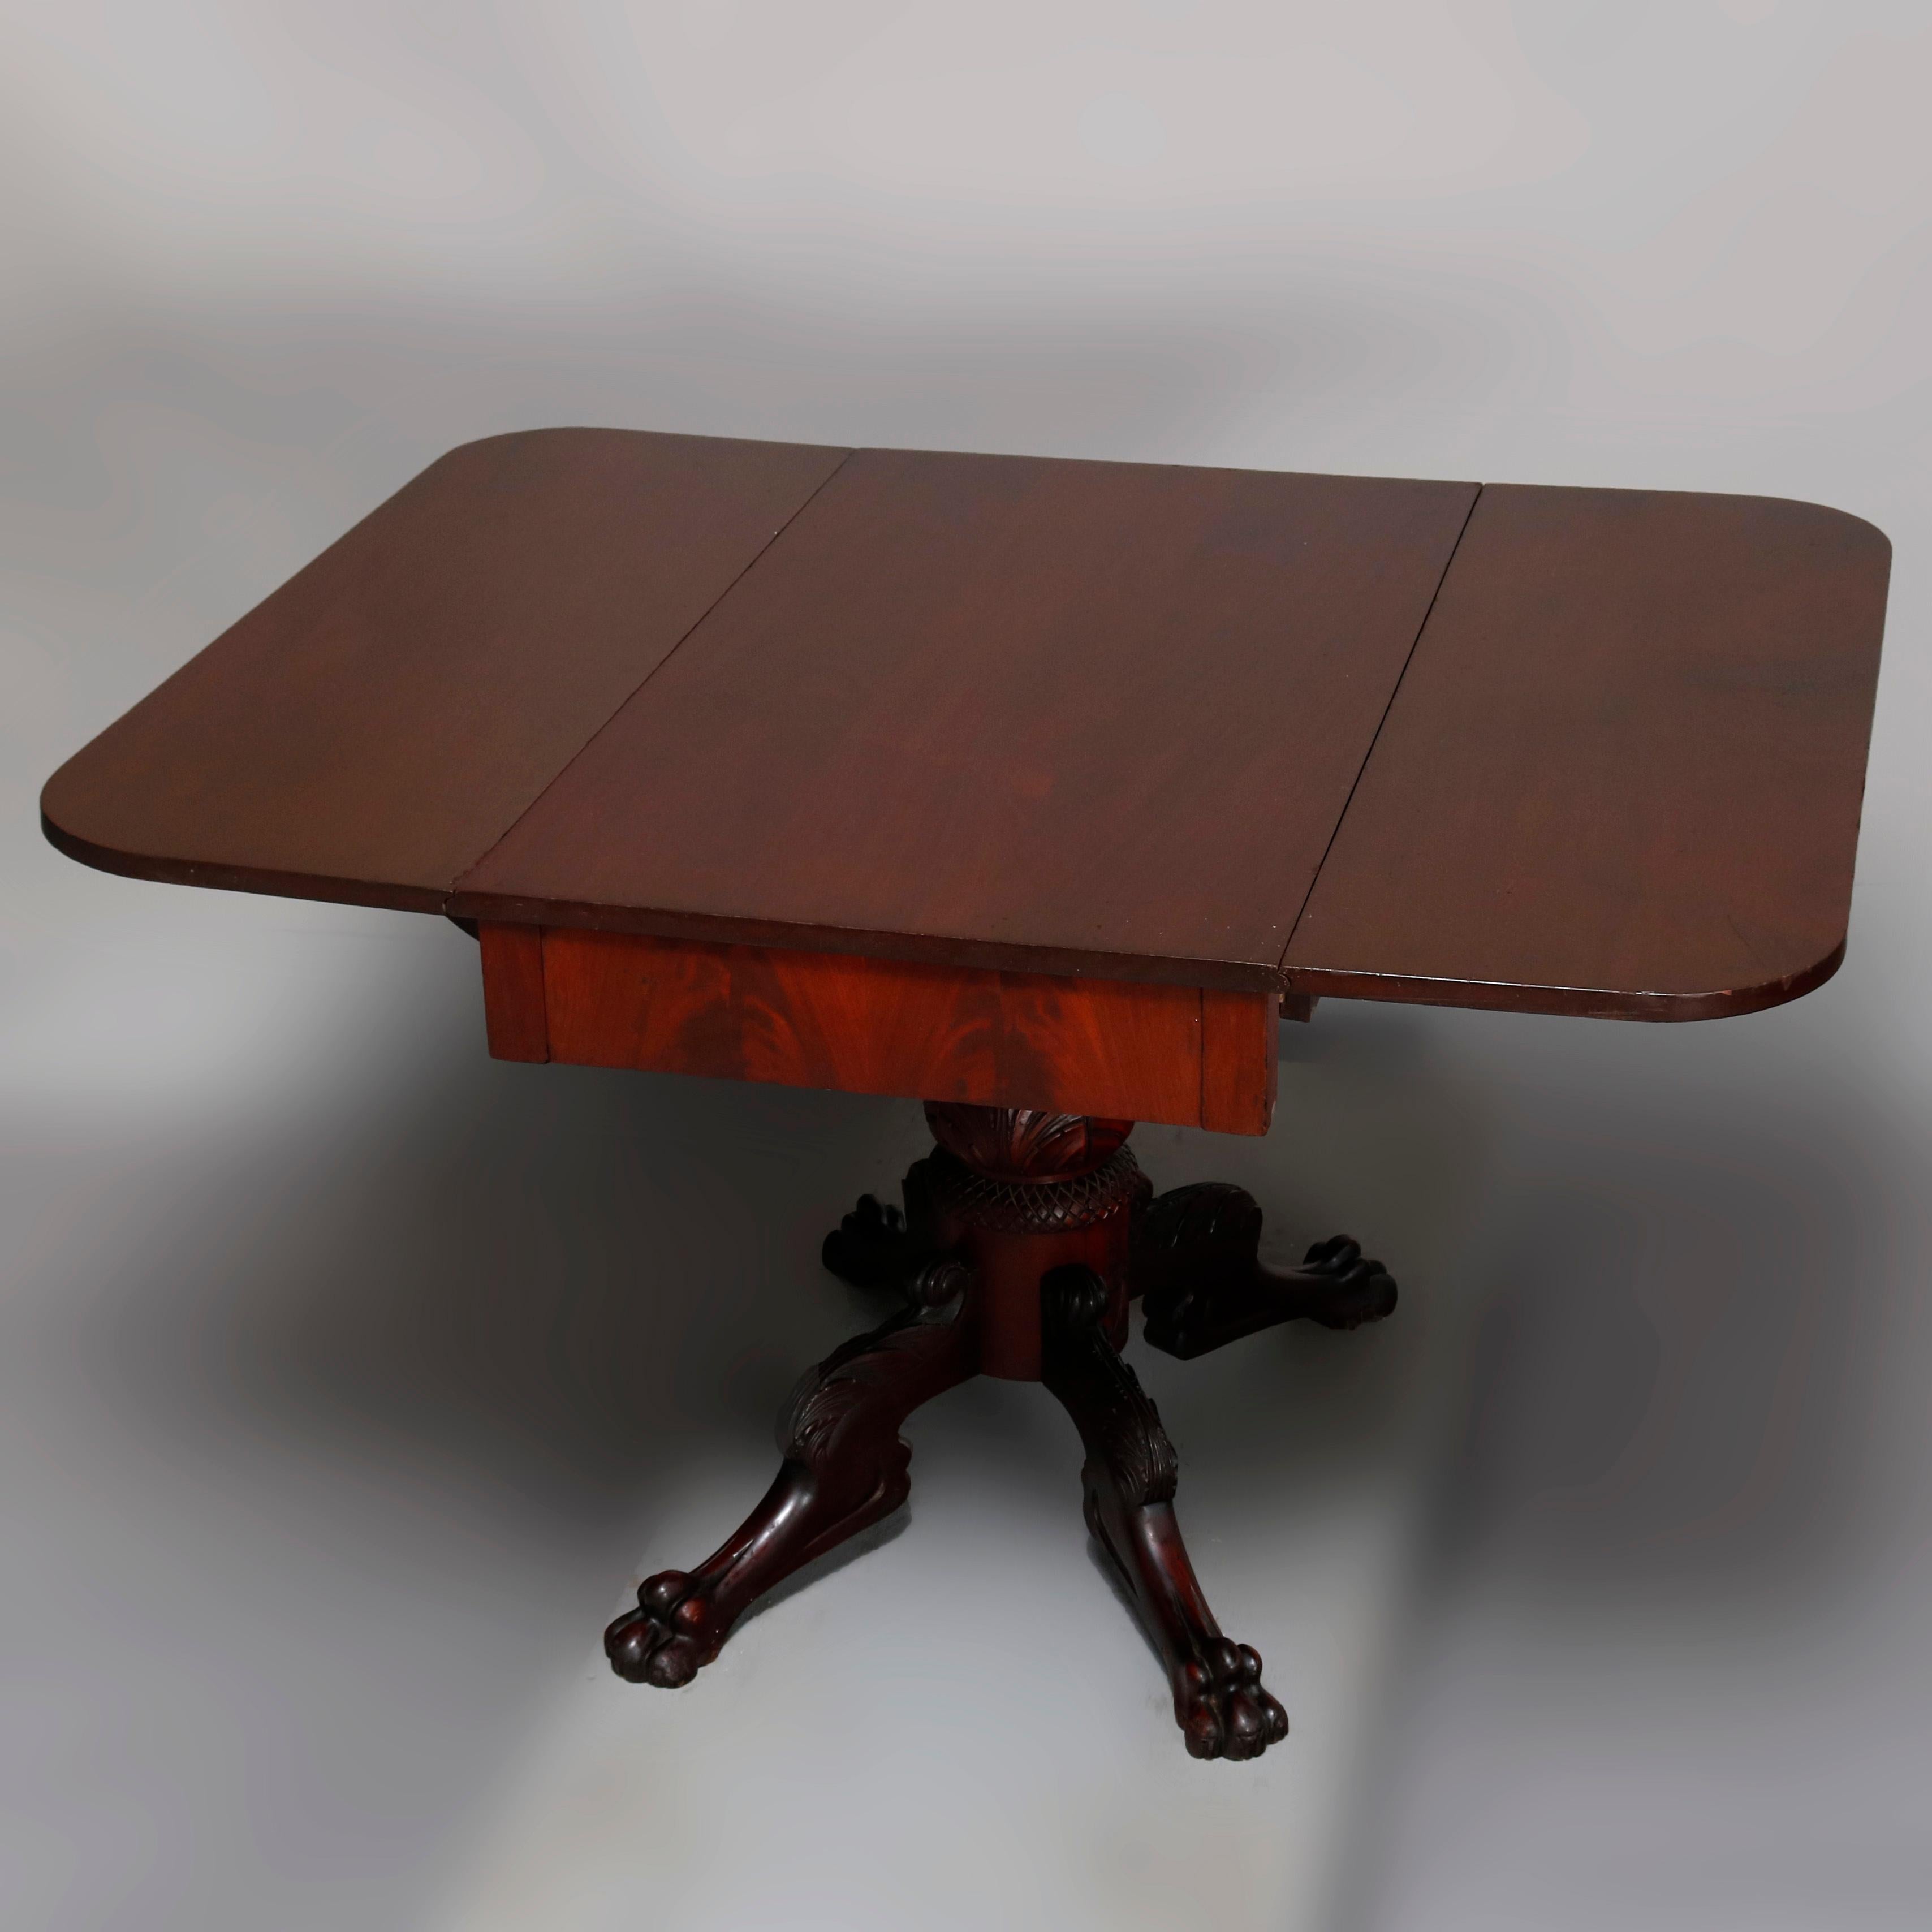 Classical American Empire Carved Mahogany Drop Leaf Dining Table, 19th Century 4